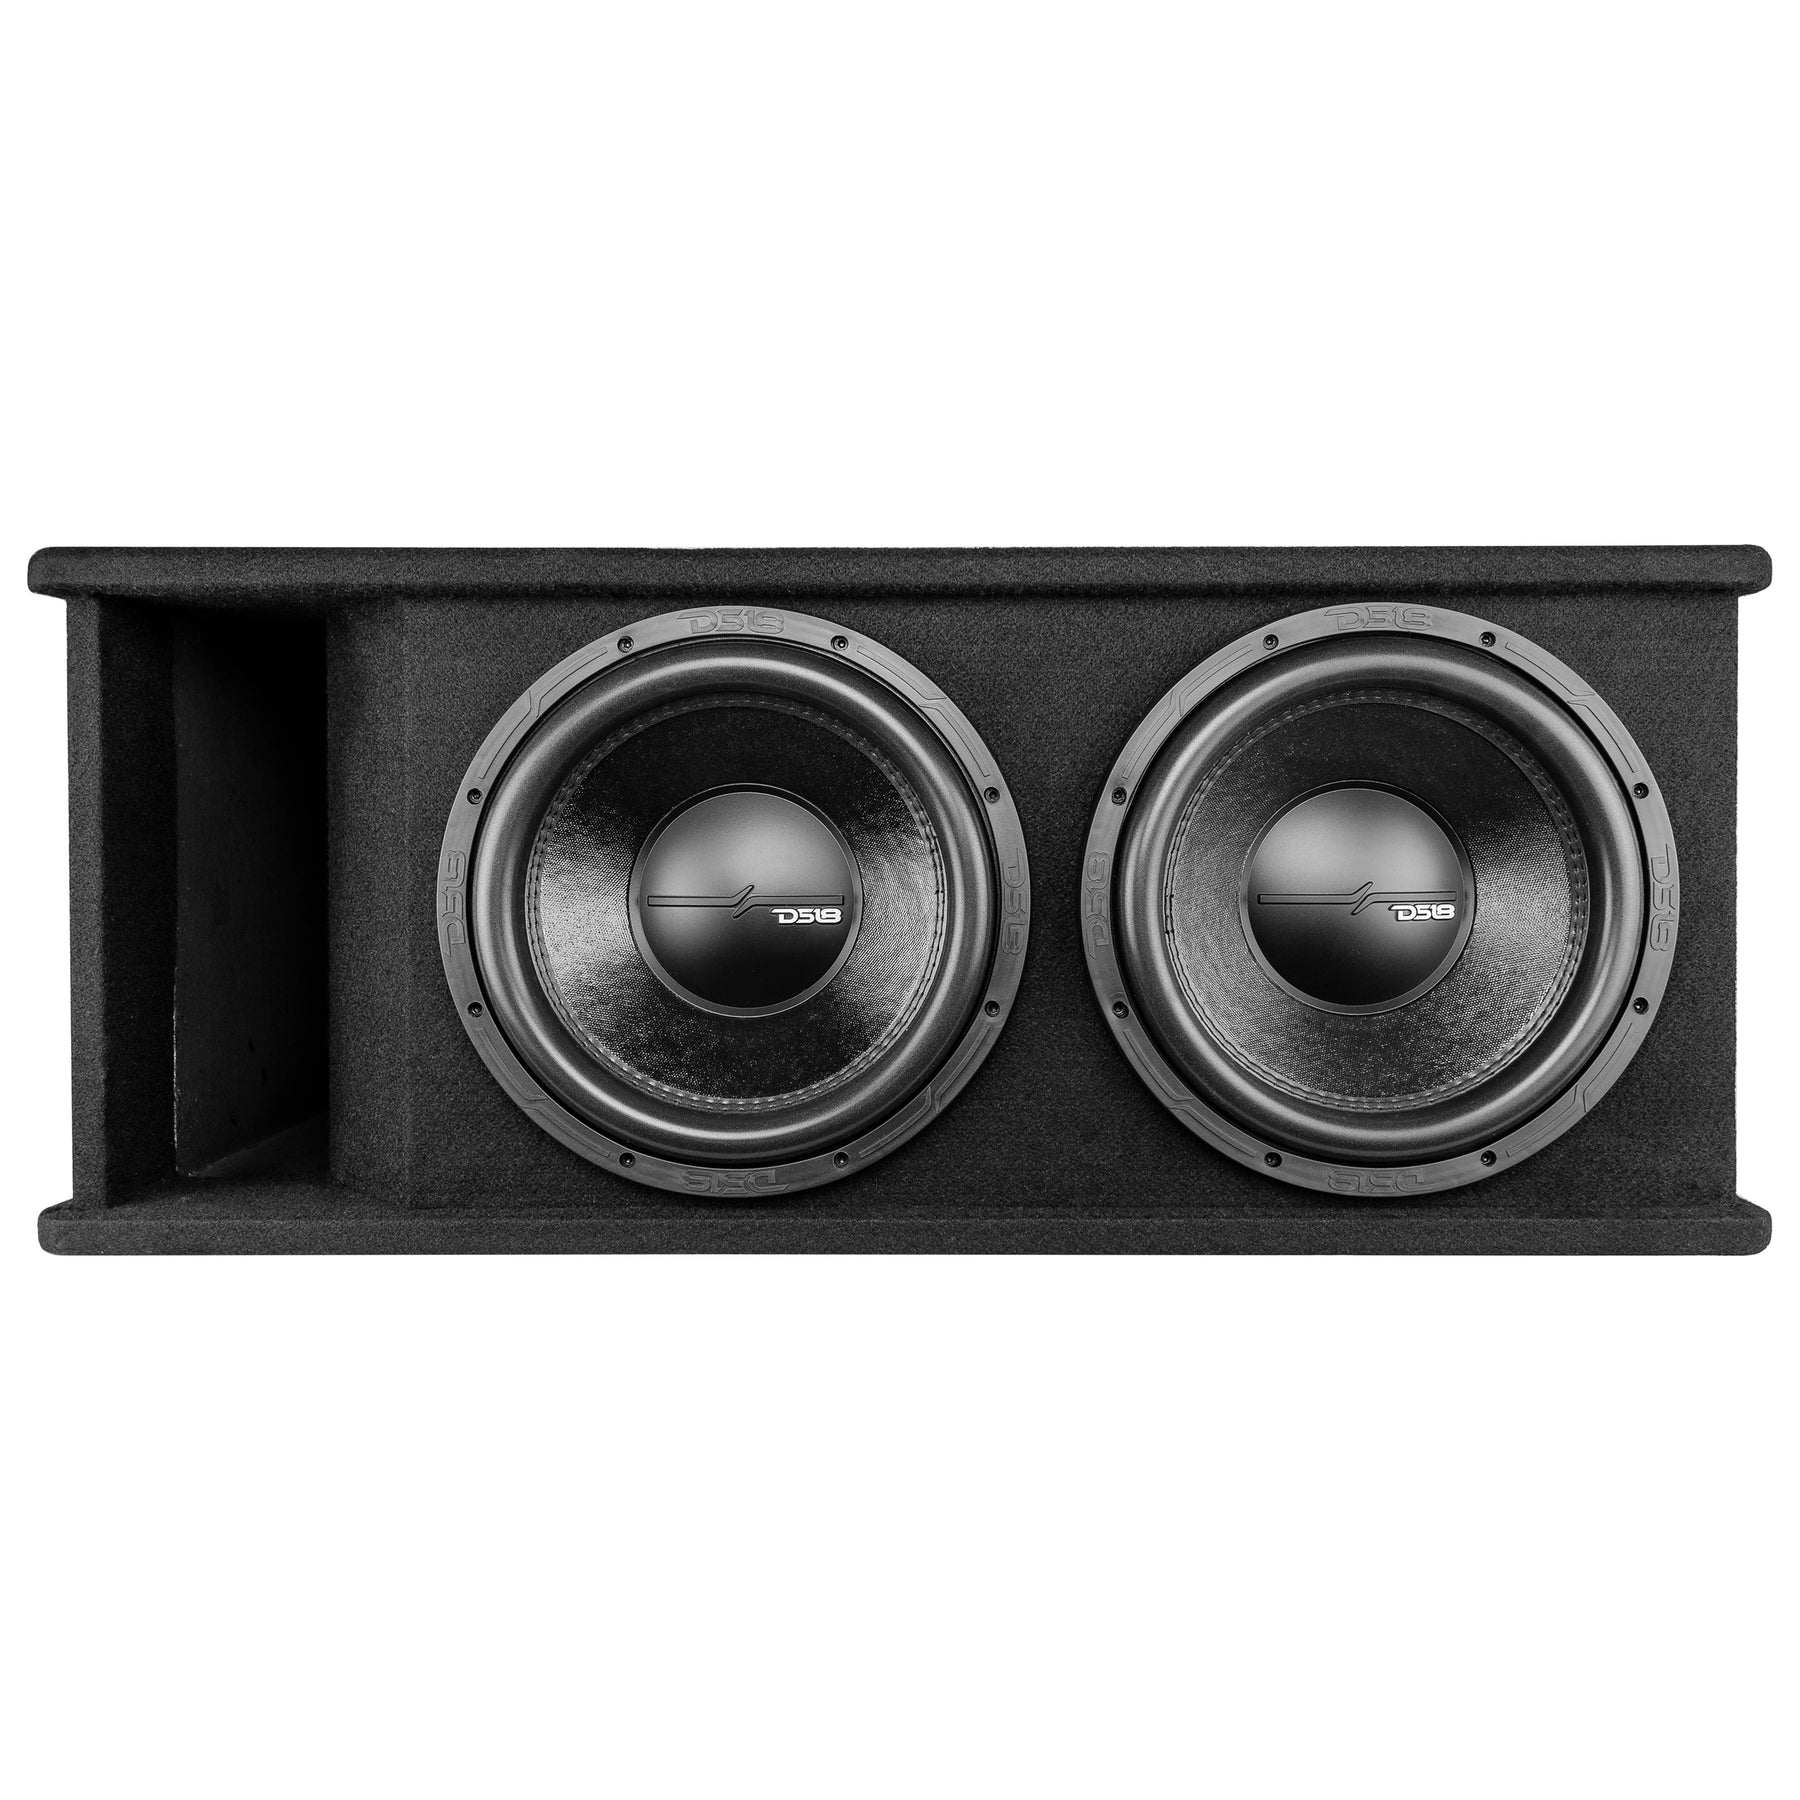 DS18 Bass Package 2 x ZR12D4 12" Subwoofers In a Ported Bo